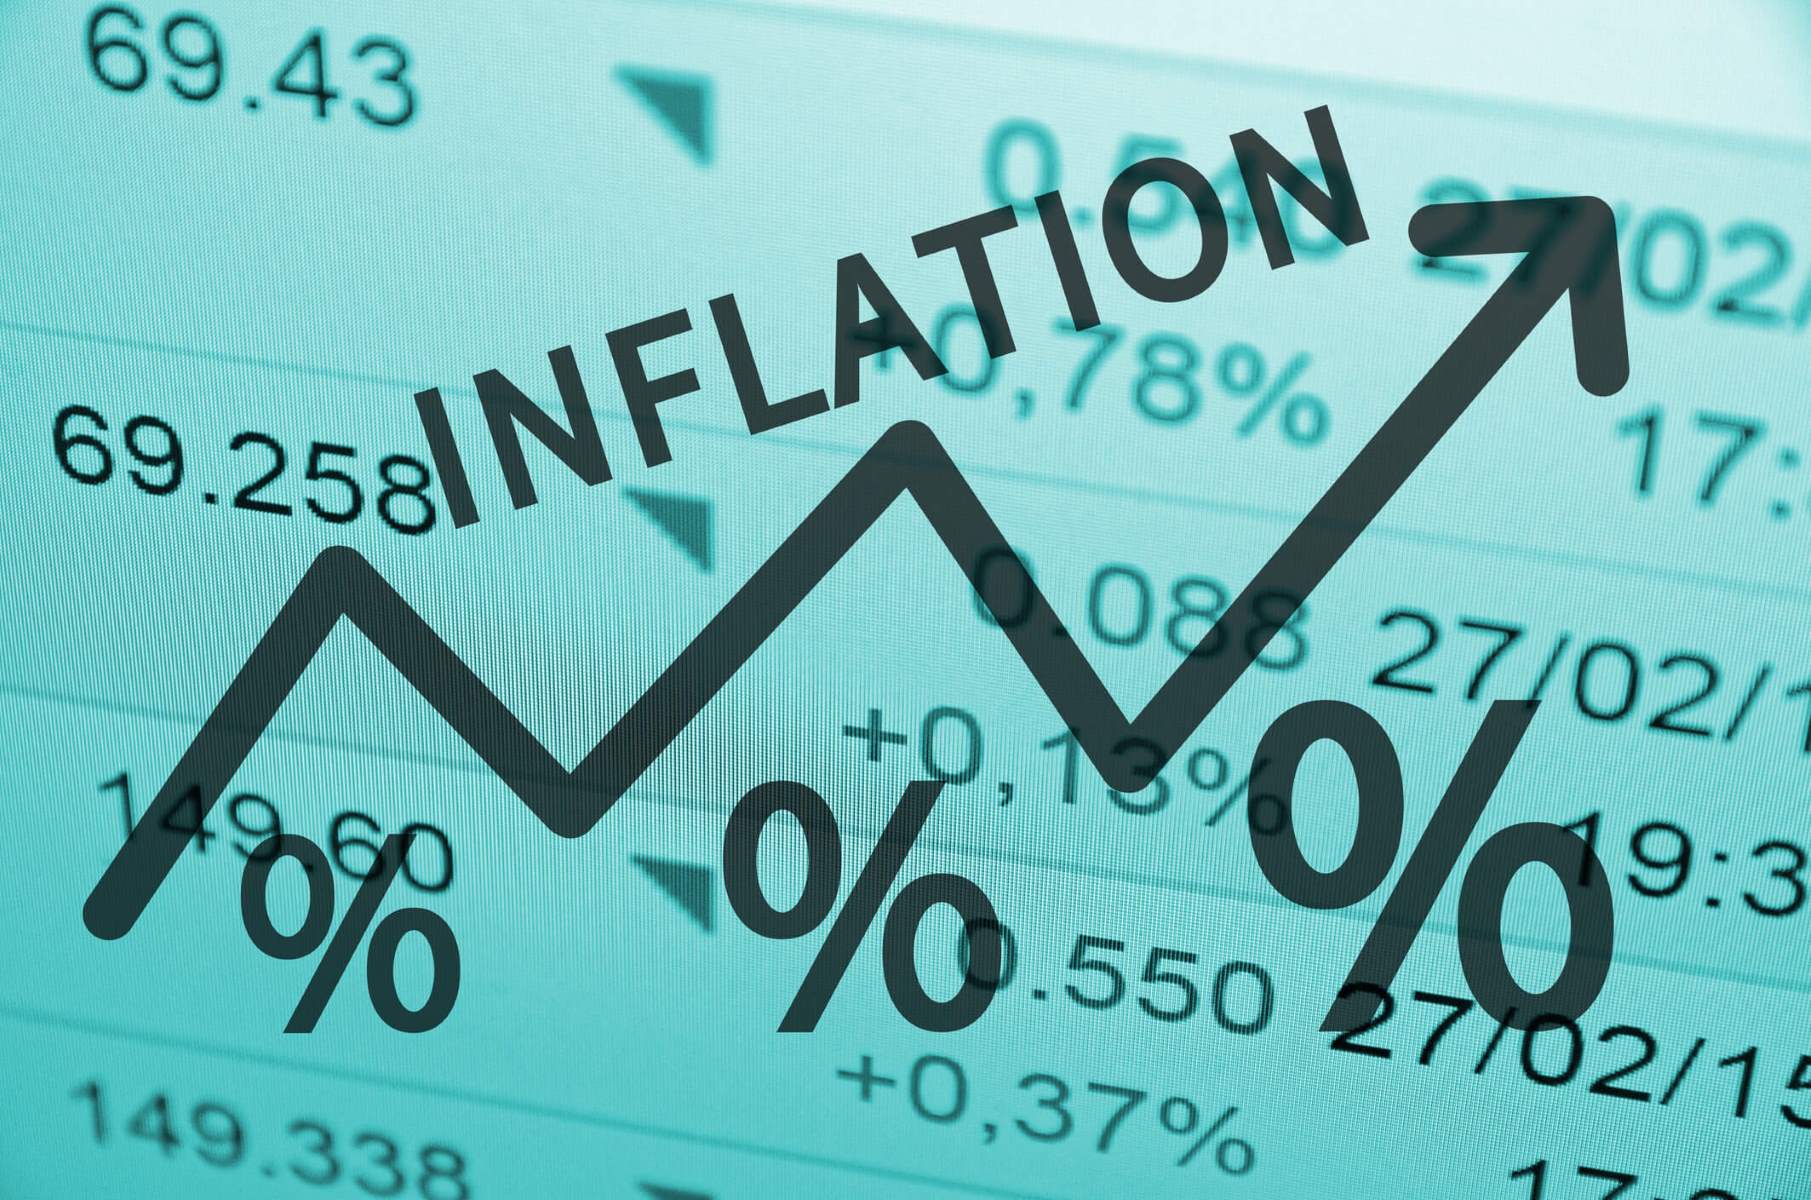 How Does Investment Affect Inflation?